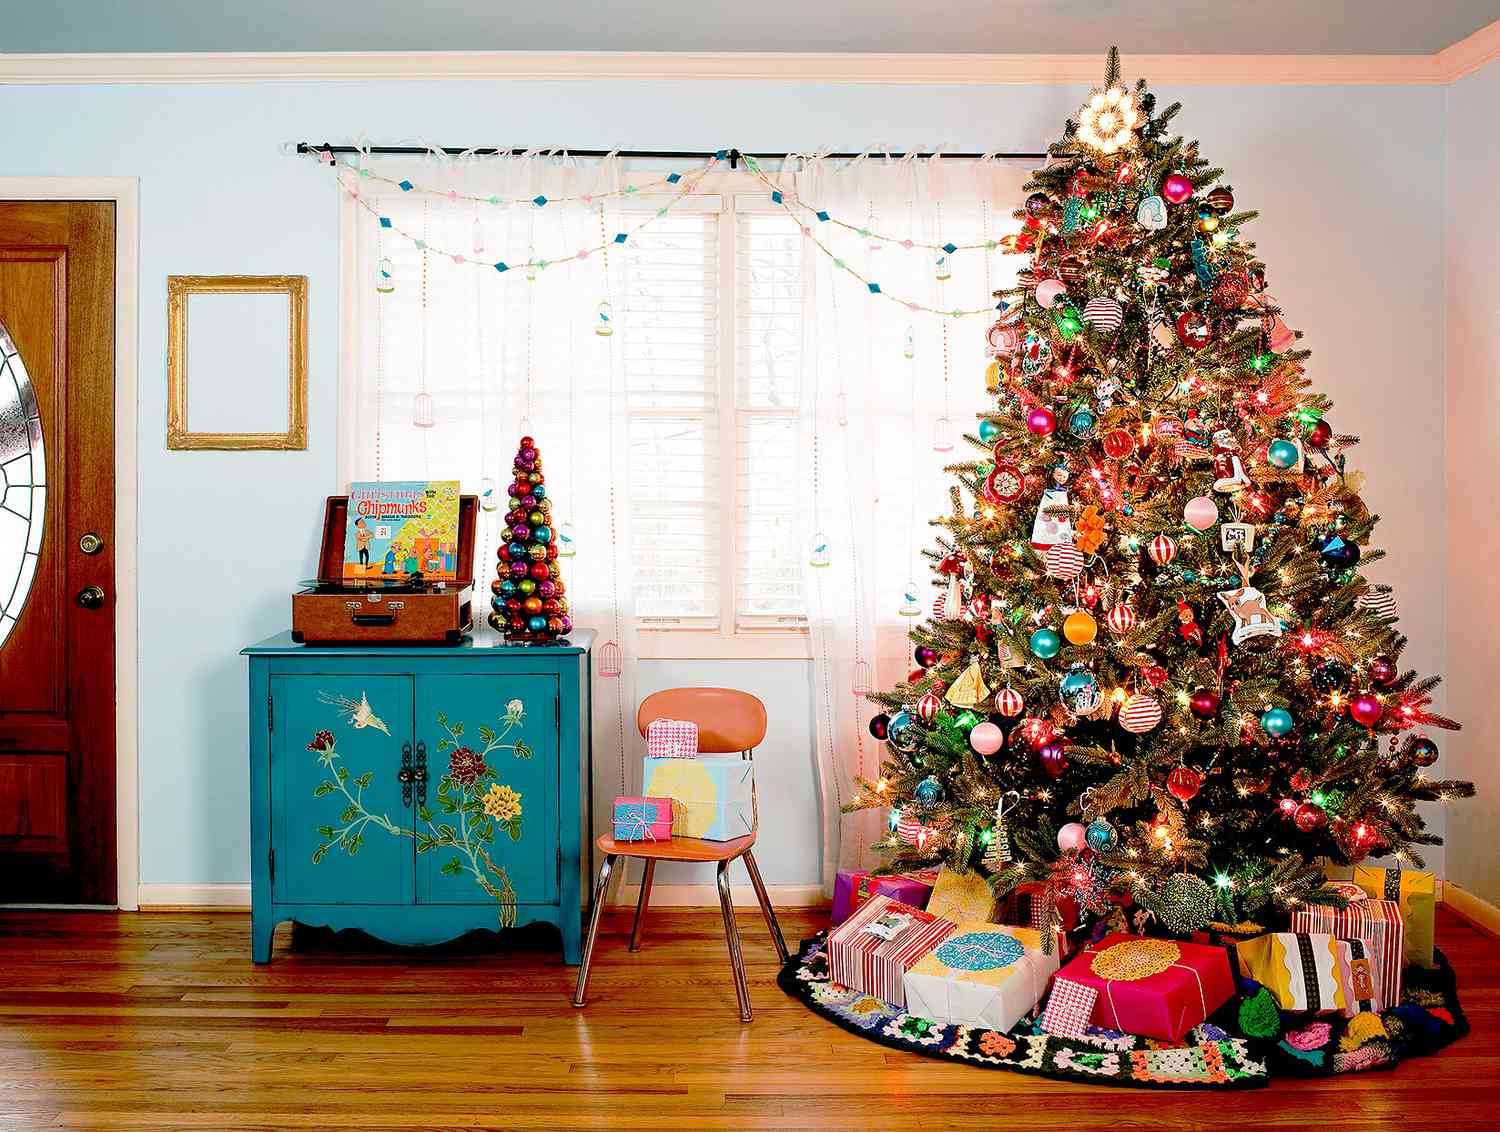 35 Pretty Christmas Living Room Ideas to Get You Ready for the Holidays